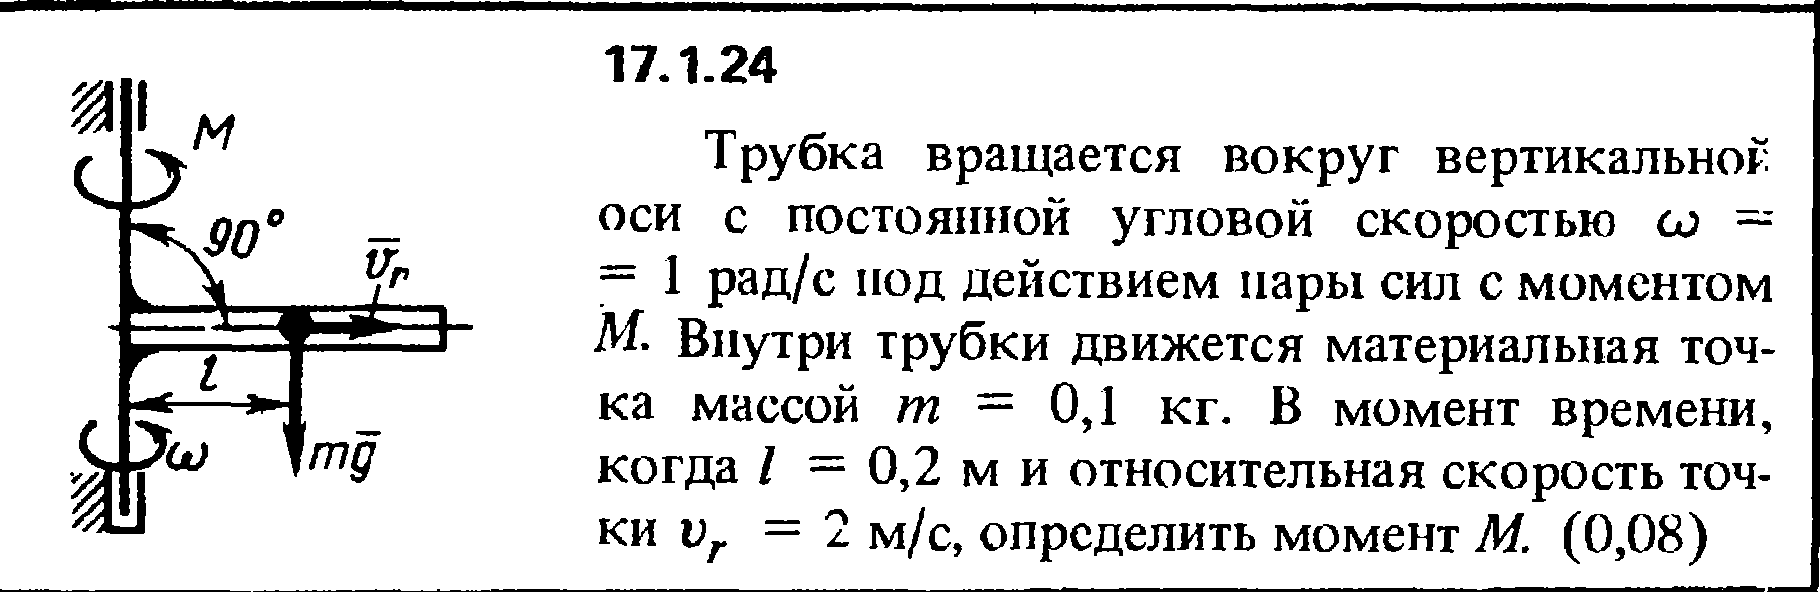 Solution 17.1.24 from the collection Kep OE 1989